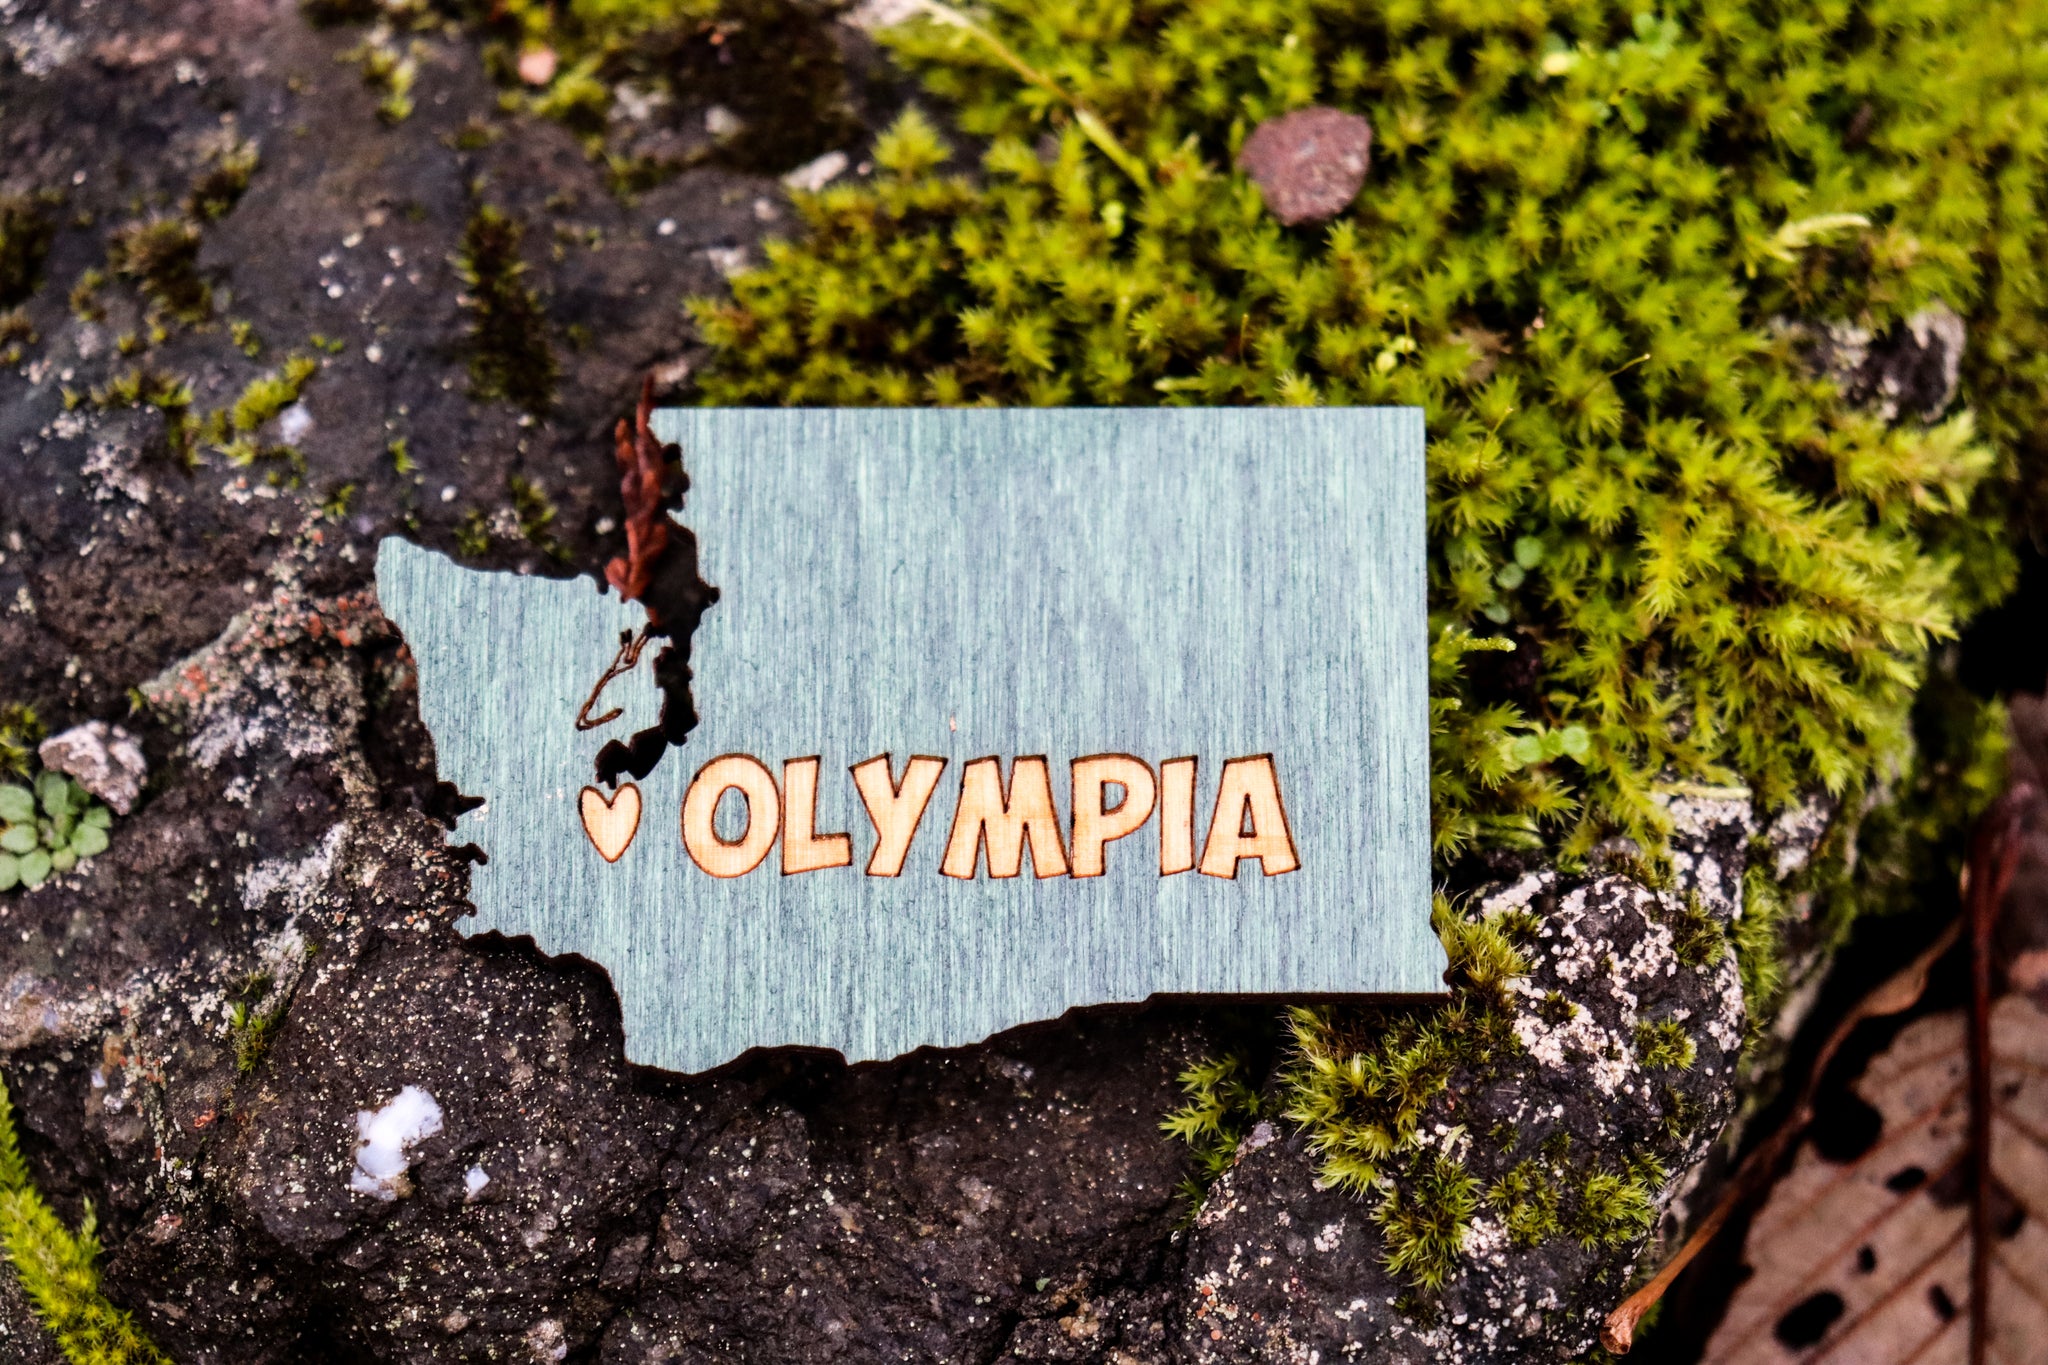 Magnet - Wood Olympia design